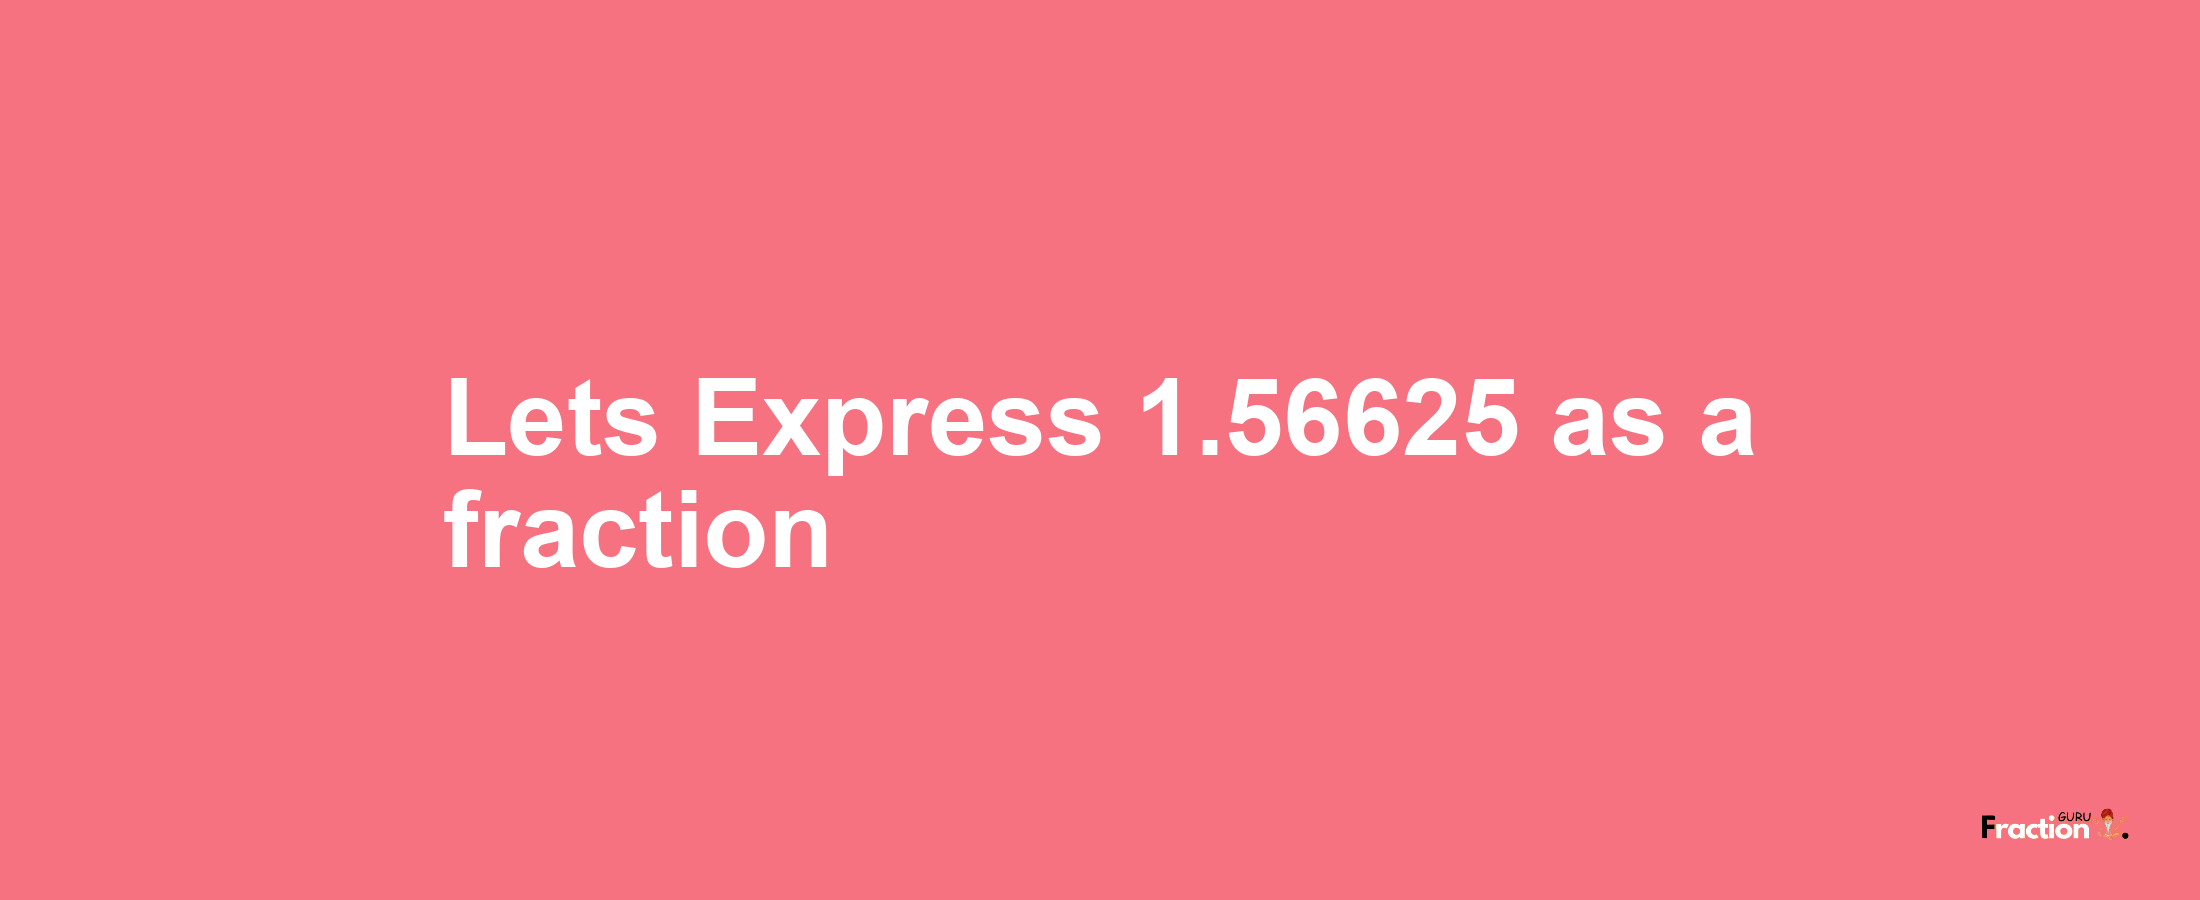 Lets Express 1.56625 as afraction